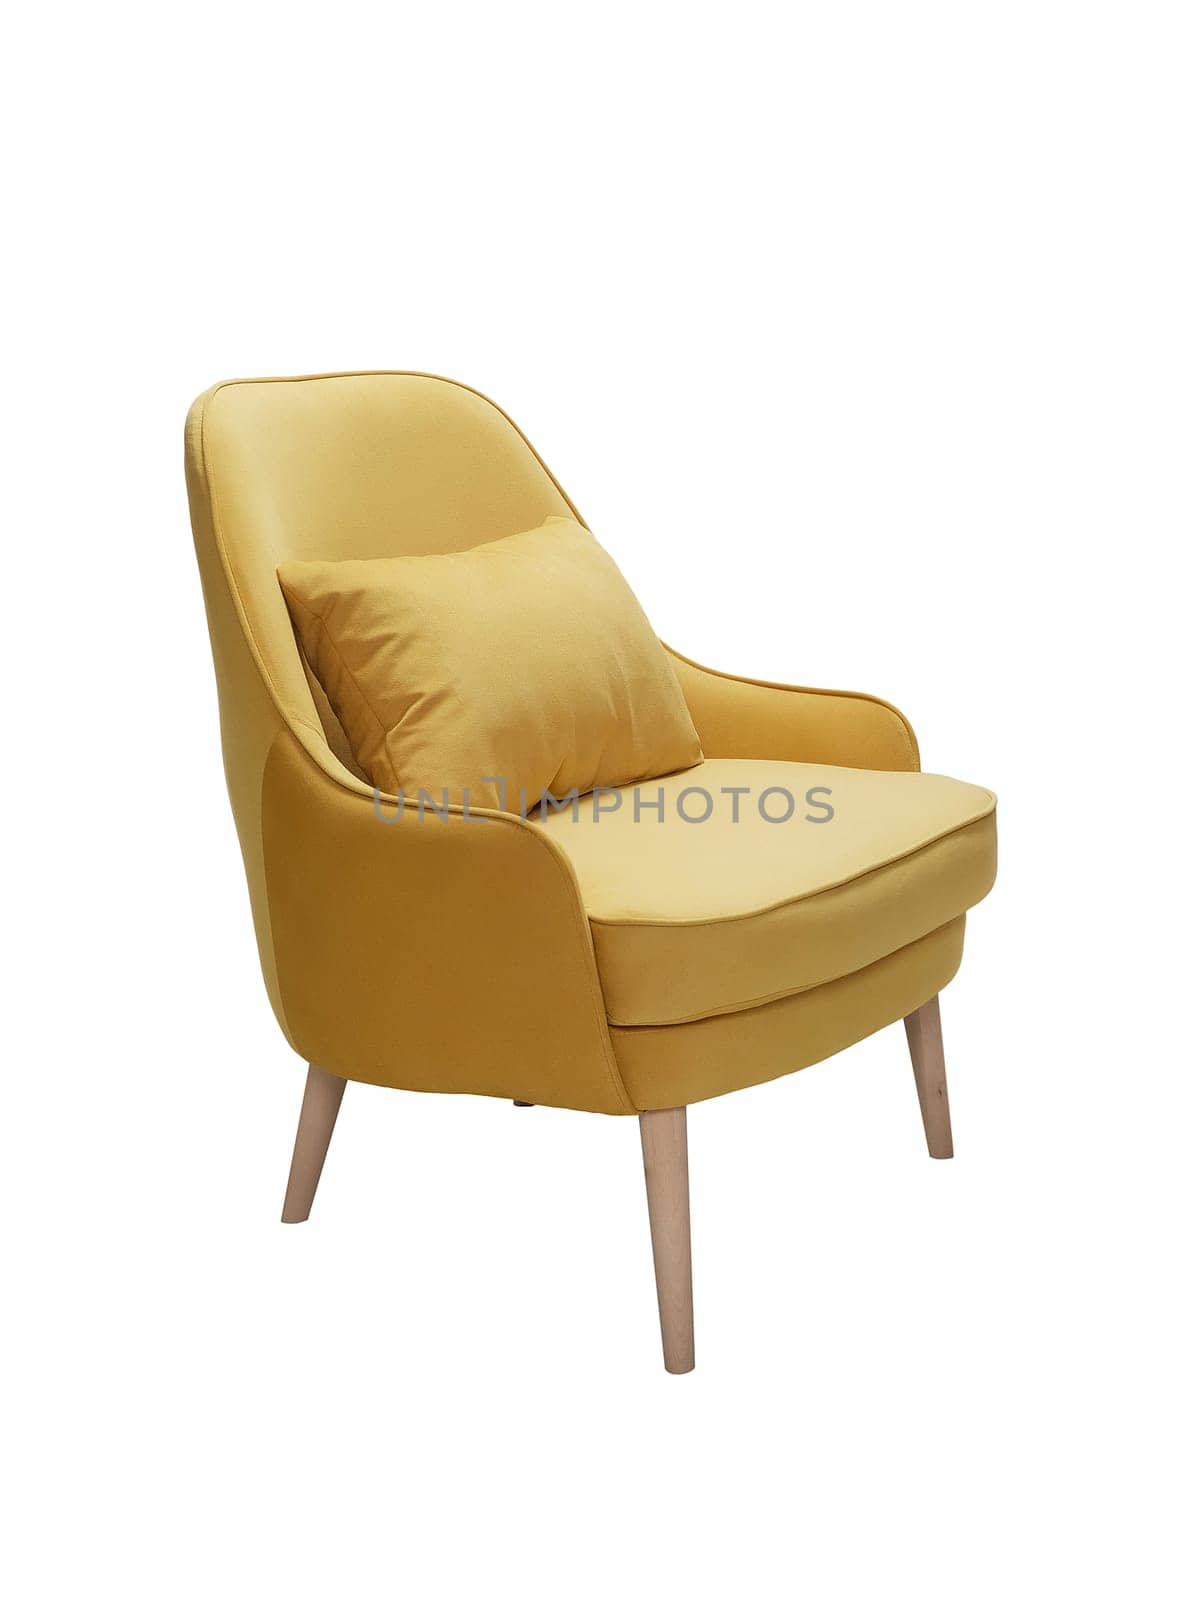 modern yellow fabric armchair with wooden legs isolated on white background, side view by artemzatsepilin